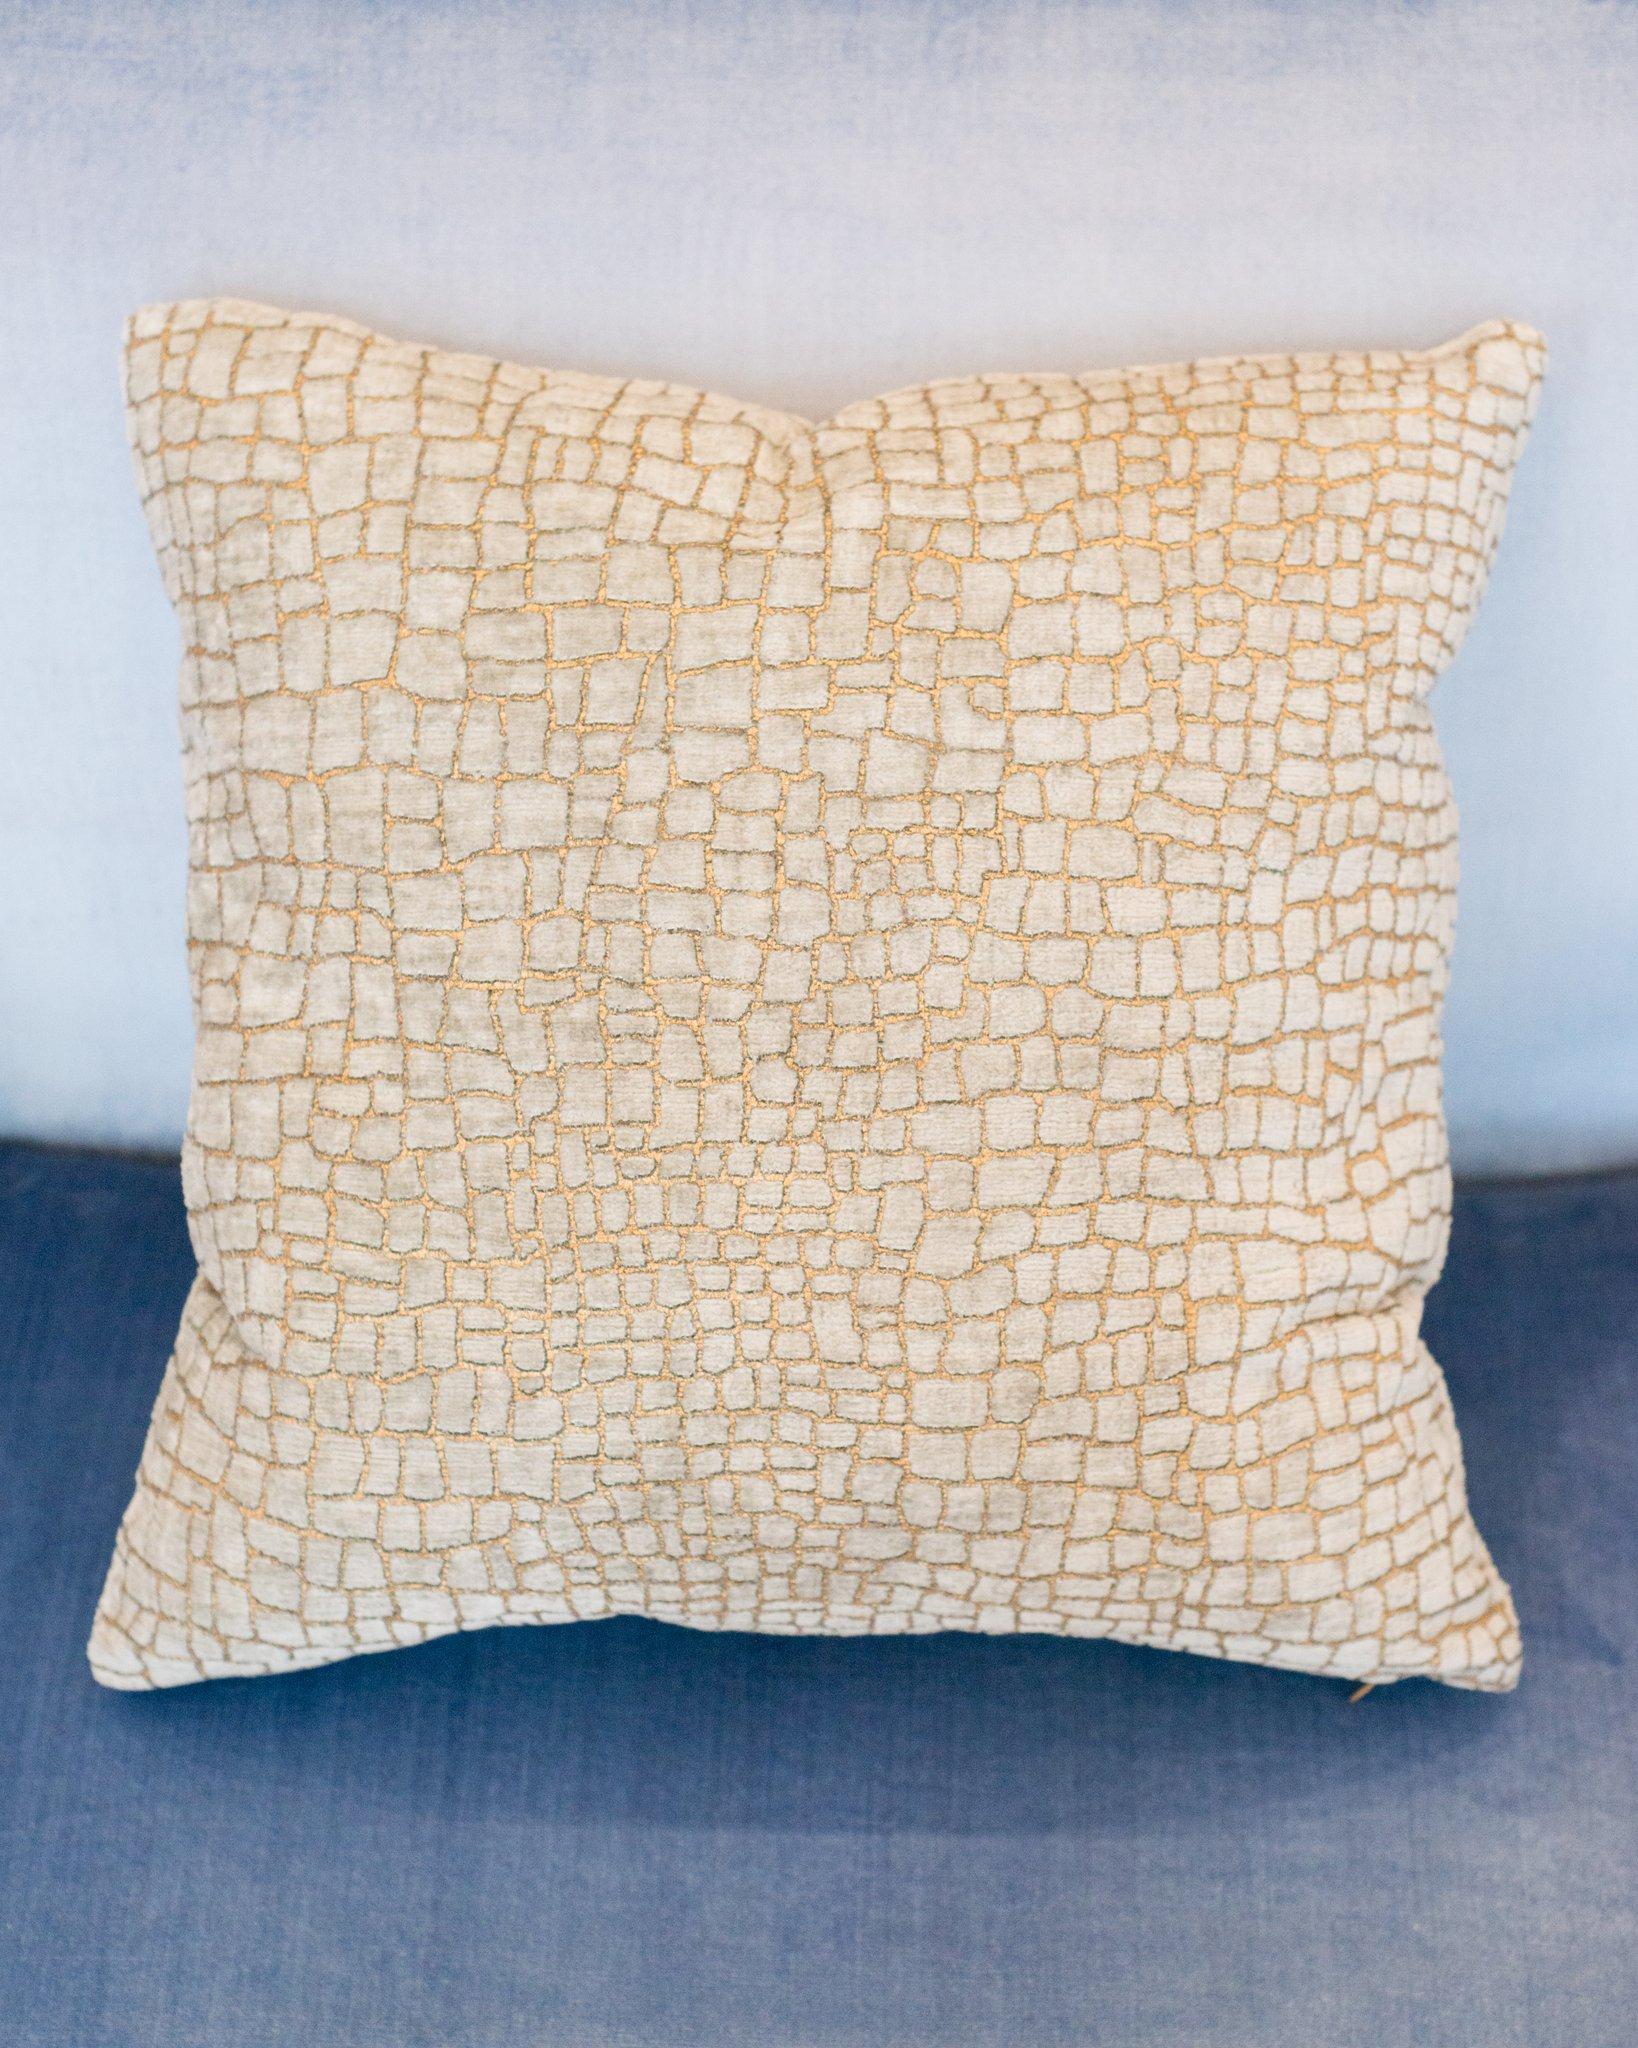 A Fortuny / Venetia Stvdivm pillow in pale grey crocodile print cotton viscose velvet with gold. Down filled, made in Venice.